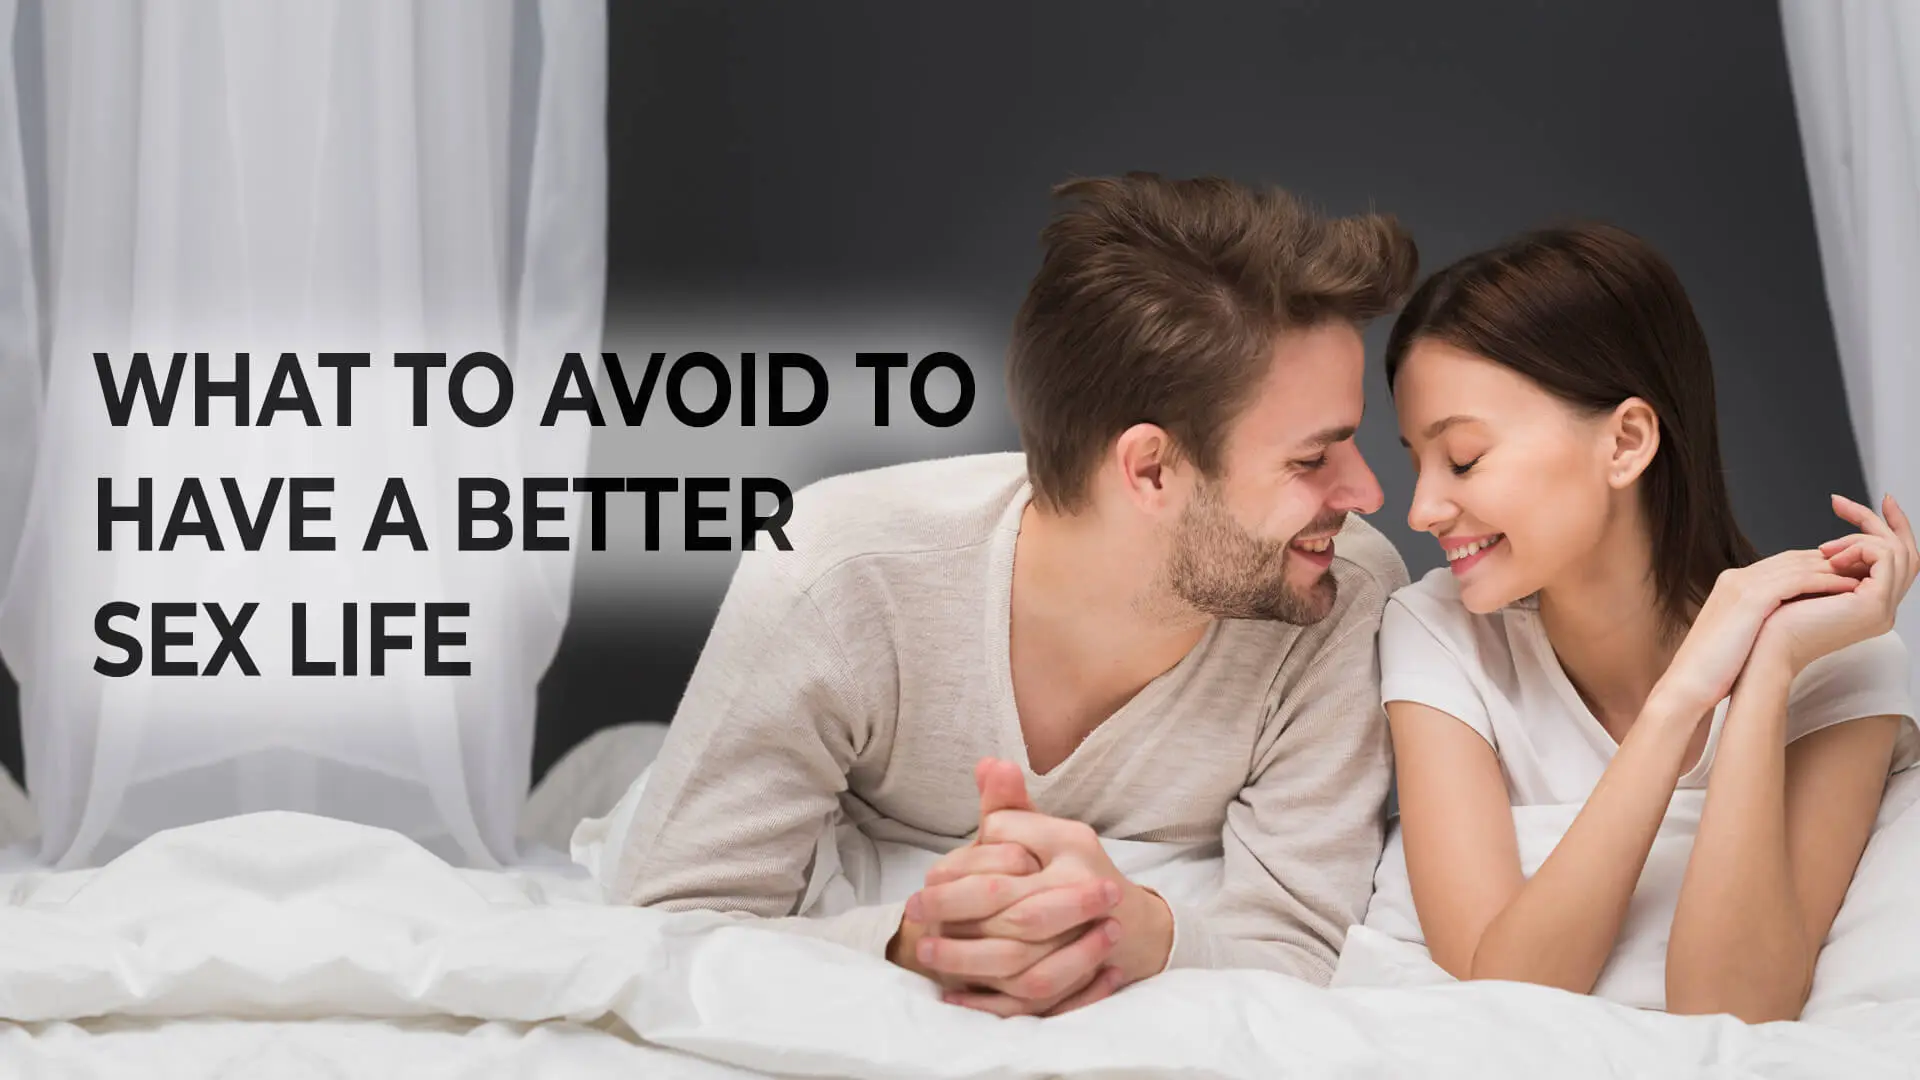 What to Avoid to Have Better Sex Life